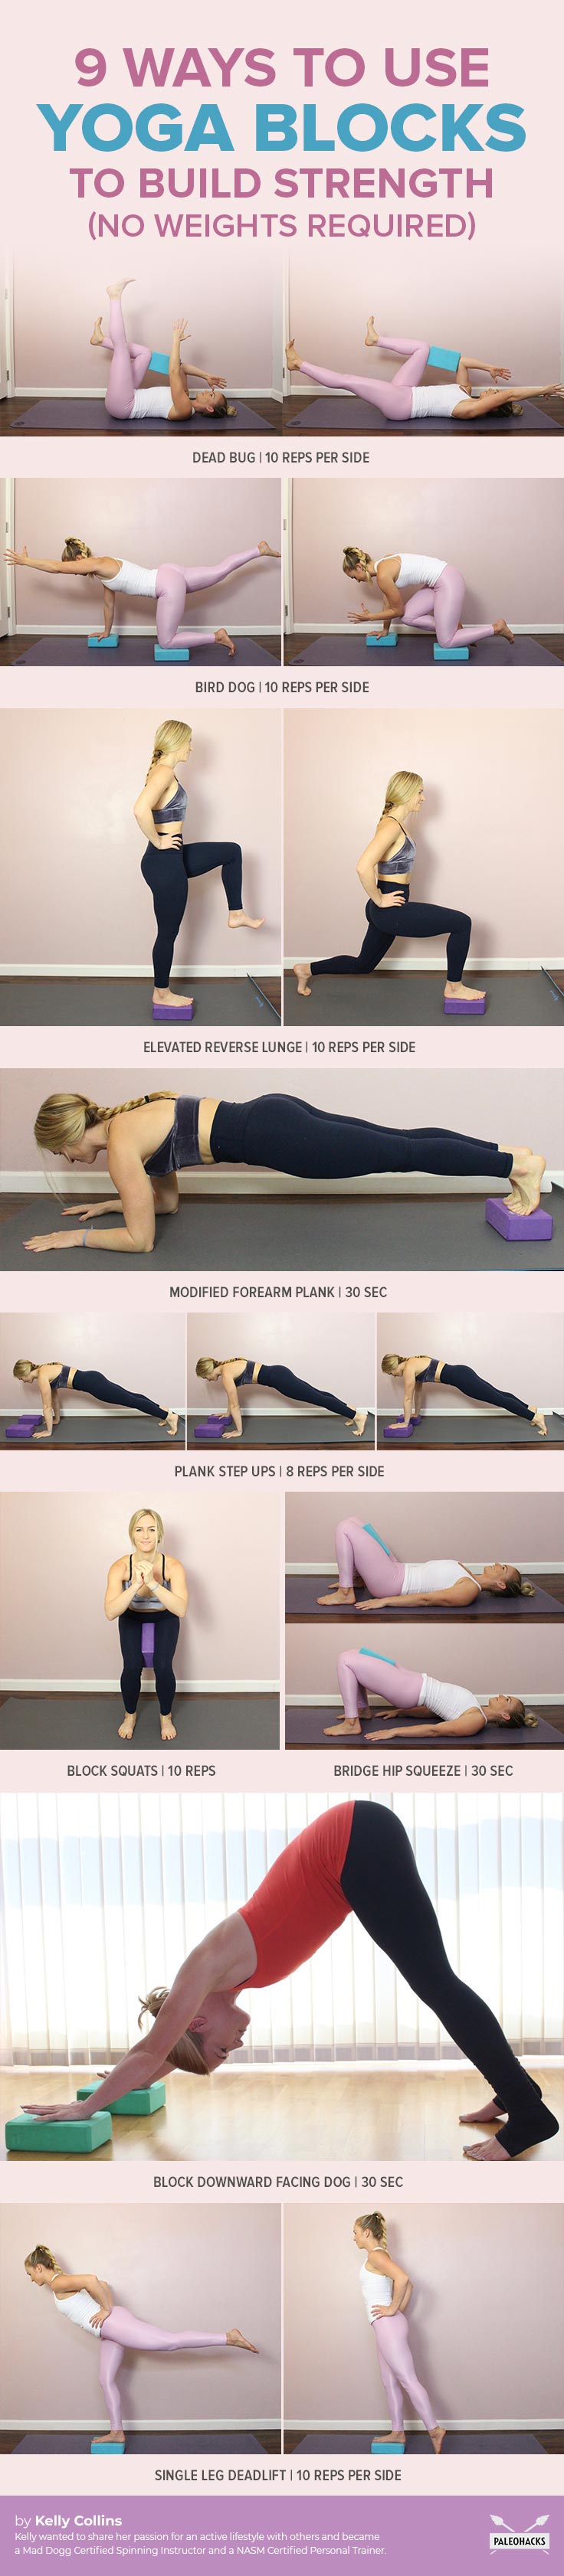 Spice up your weight training with this gentle strengthening routine. Just grab a pair of yoga blocks and an exercise mat and get ready to tone your entire body.